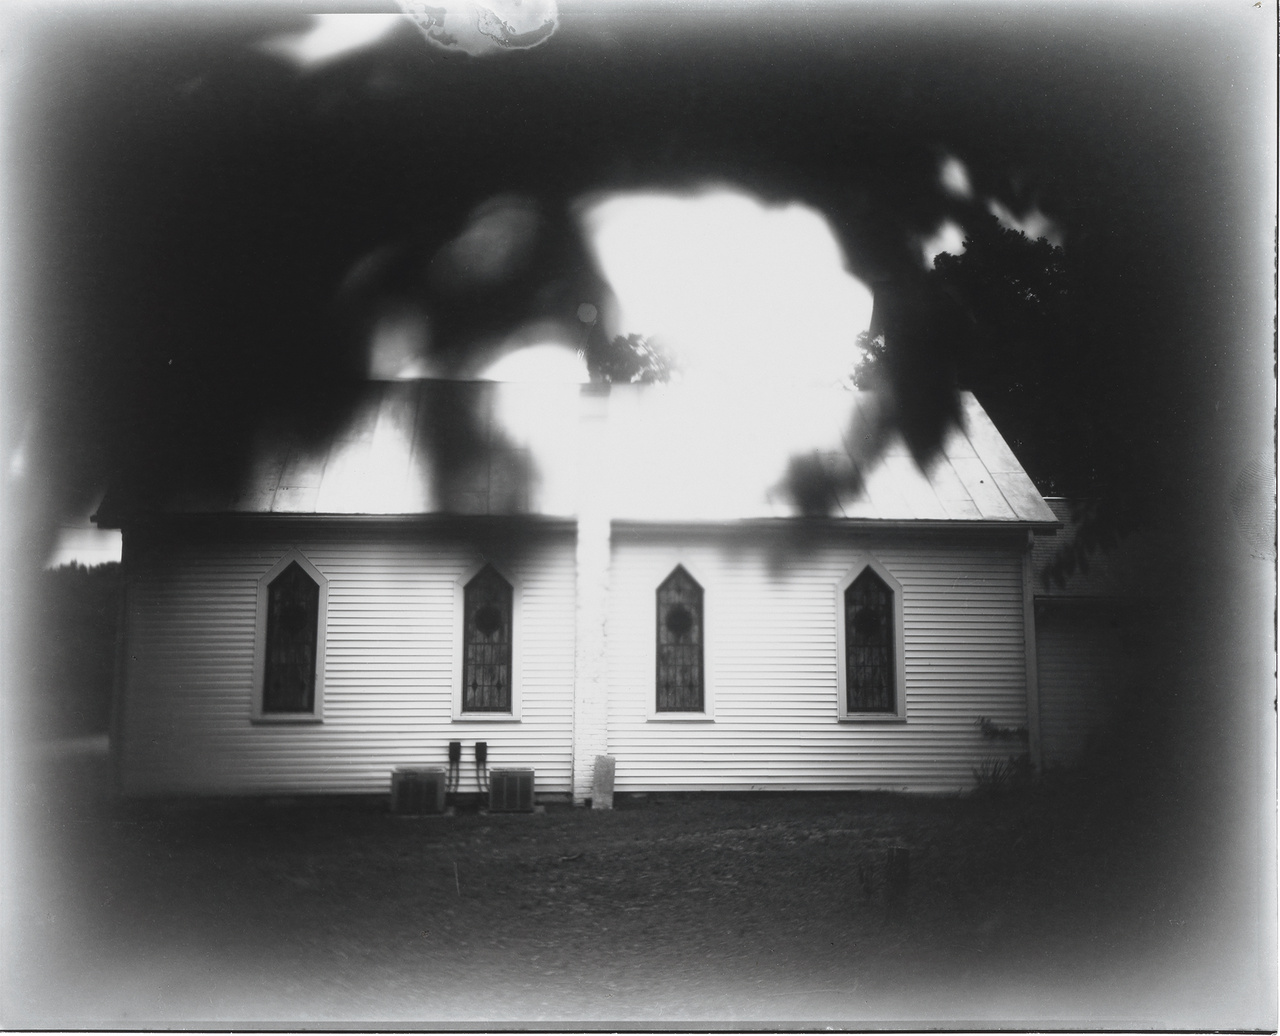 Beulah Baptist 01:01 2008-2016 gelatin silver print Collection of the artist
                        